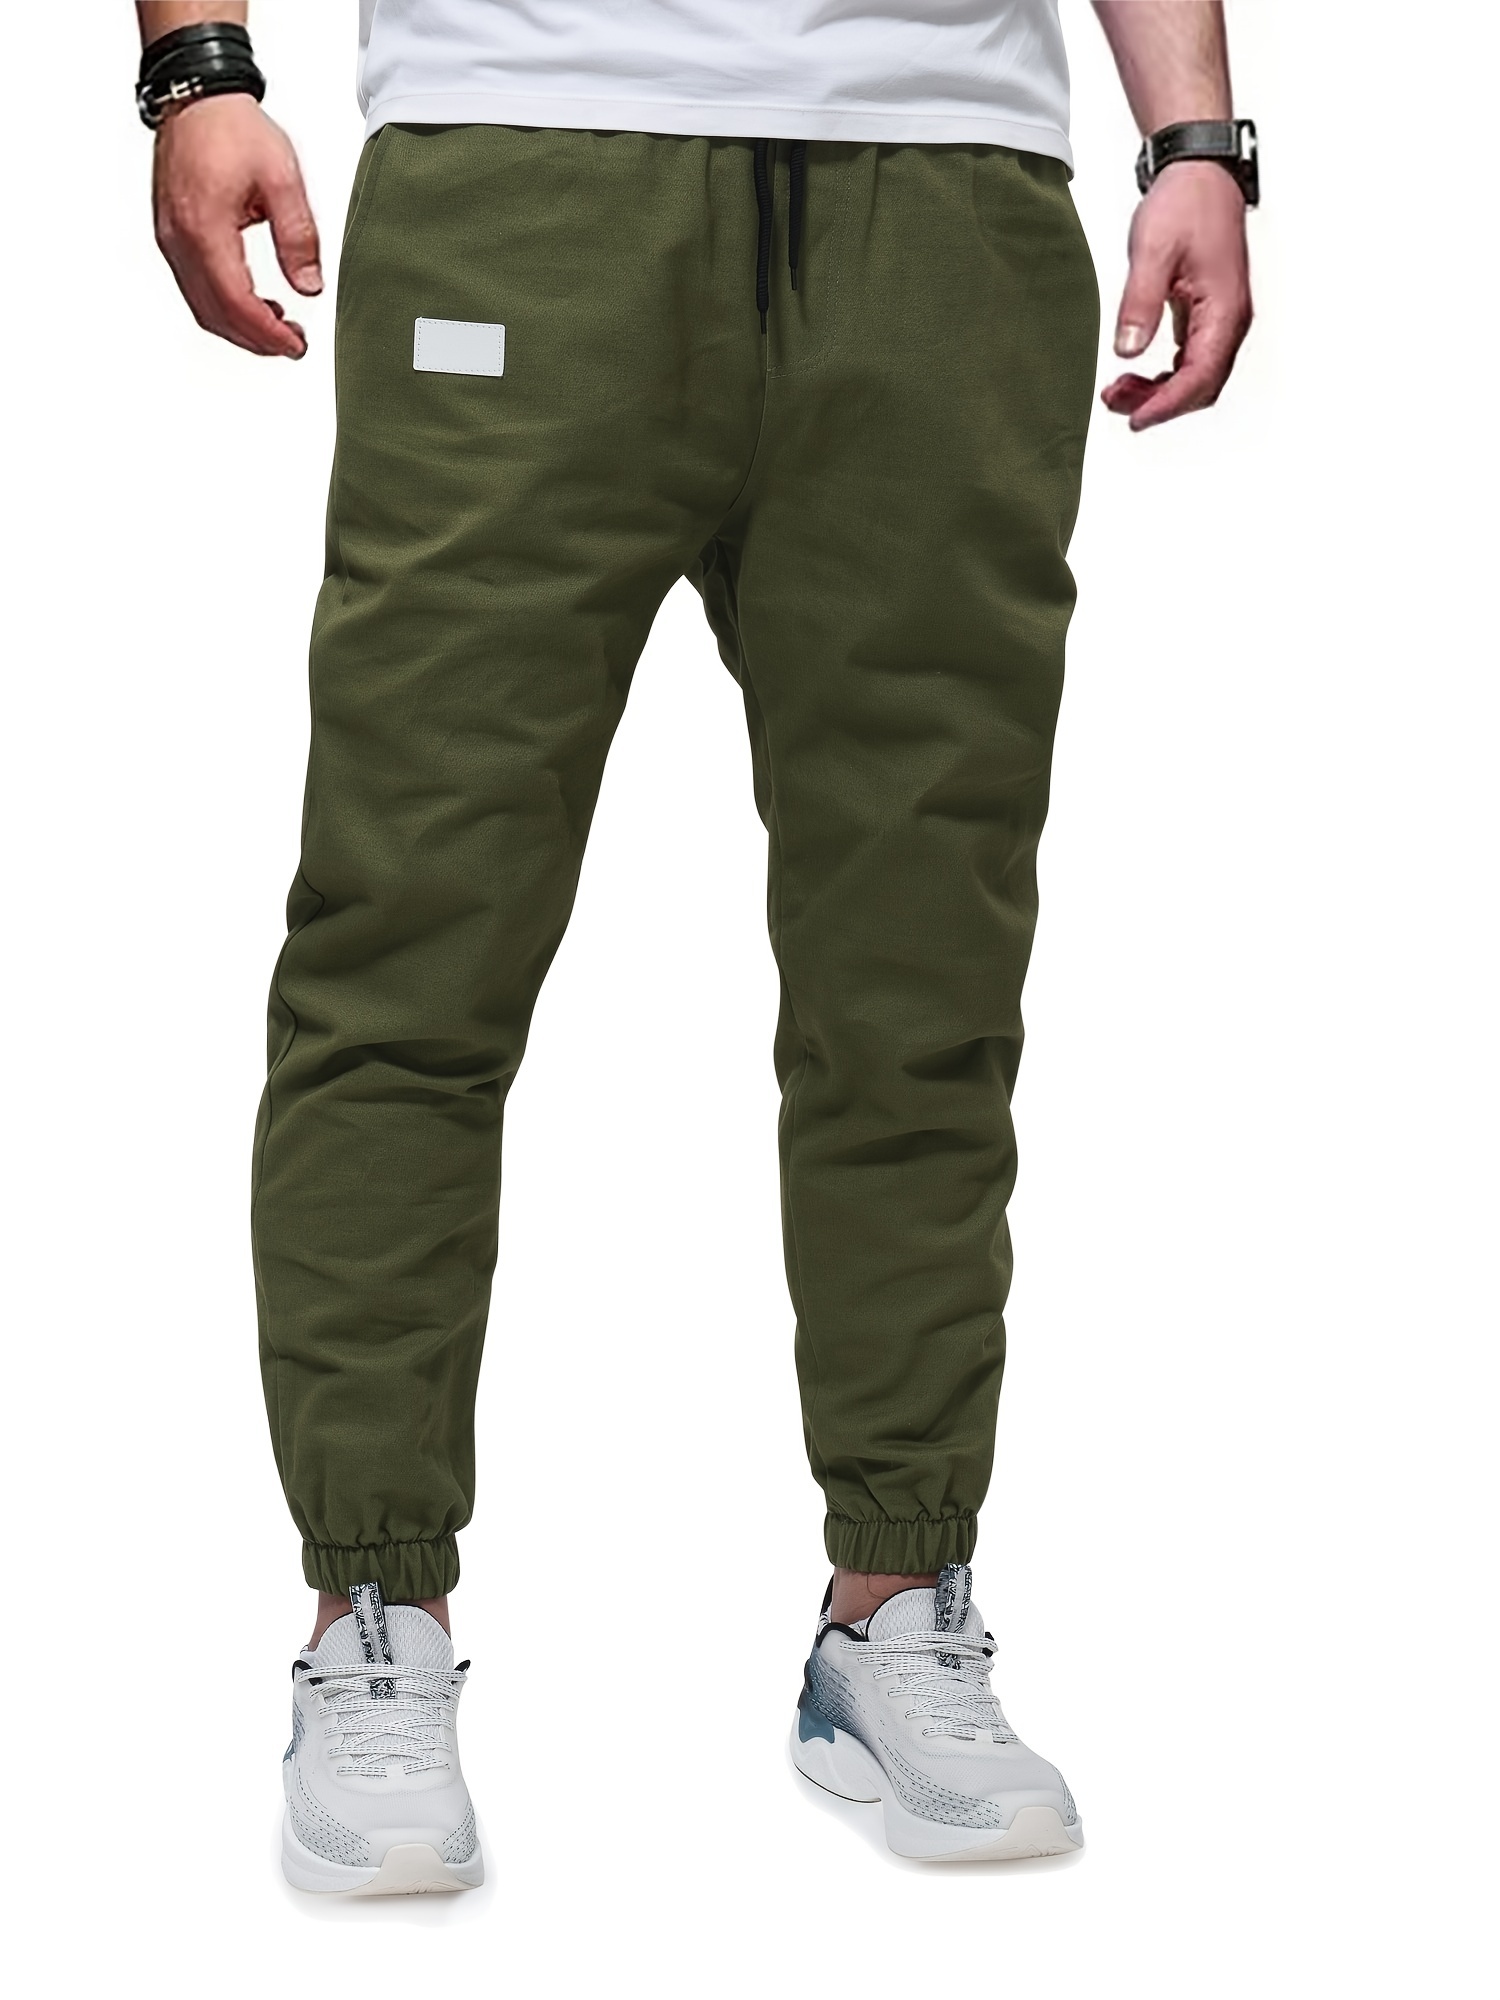 Olive Green Solid Color Kids Unisex Pants Children Guard Trousers Elastic  Waistband Joggers With 2 Pockets Plus Size Available 